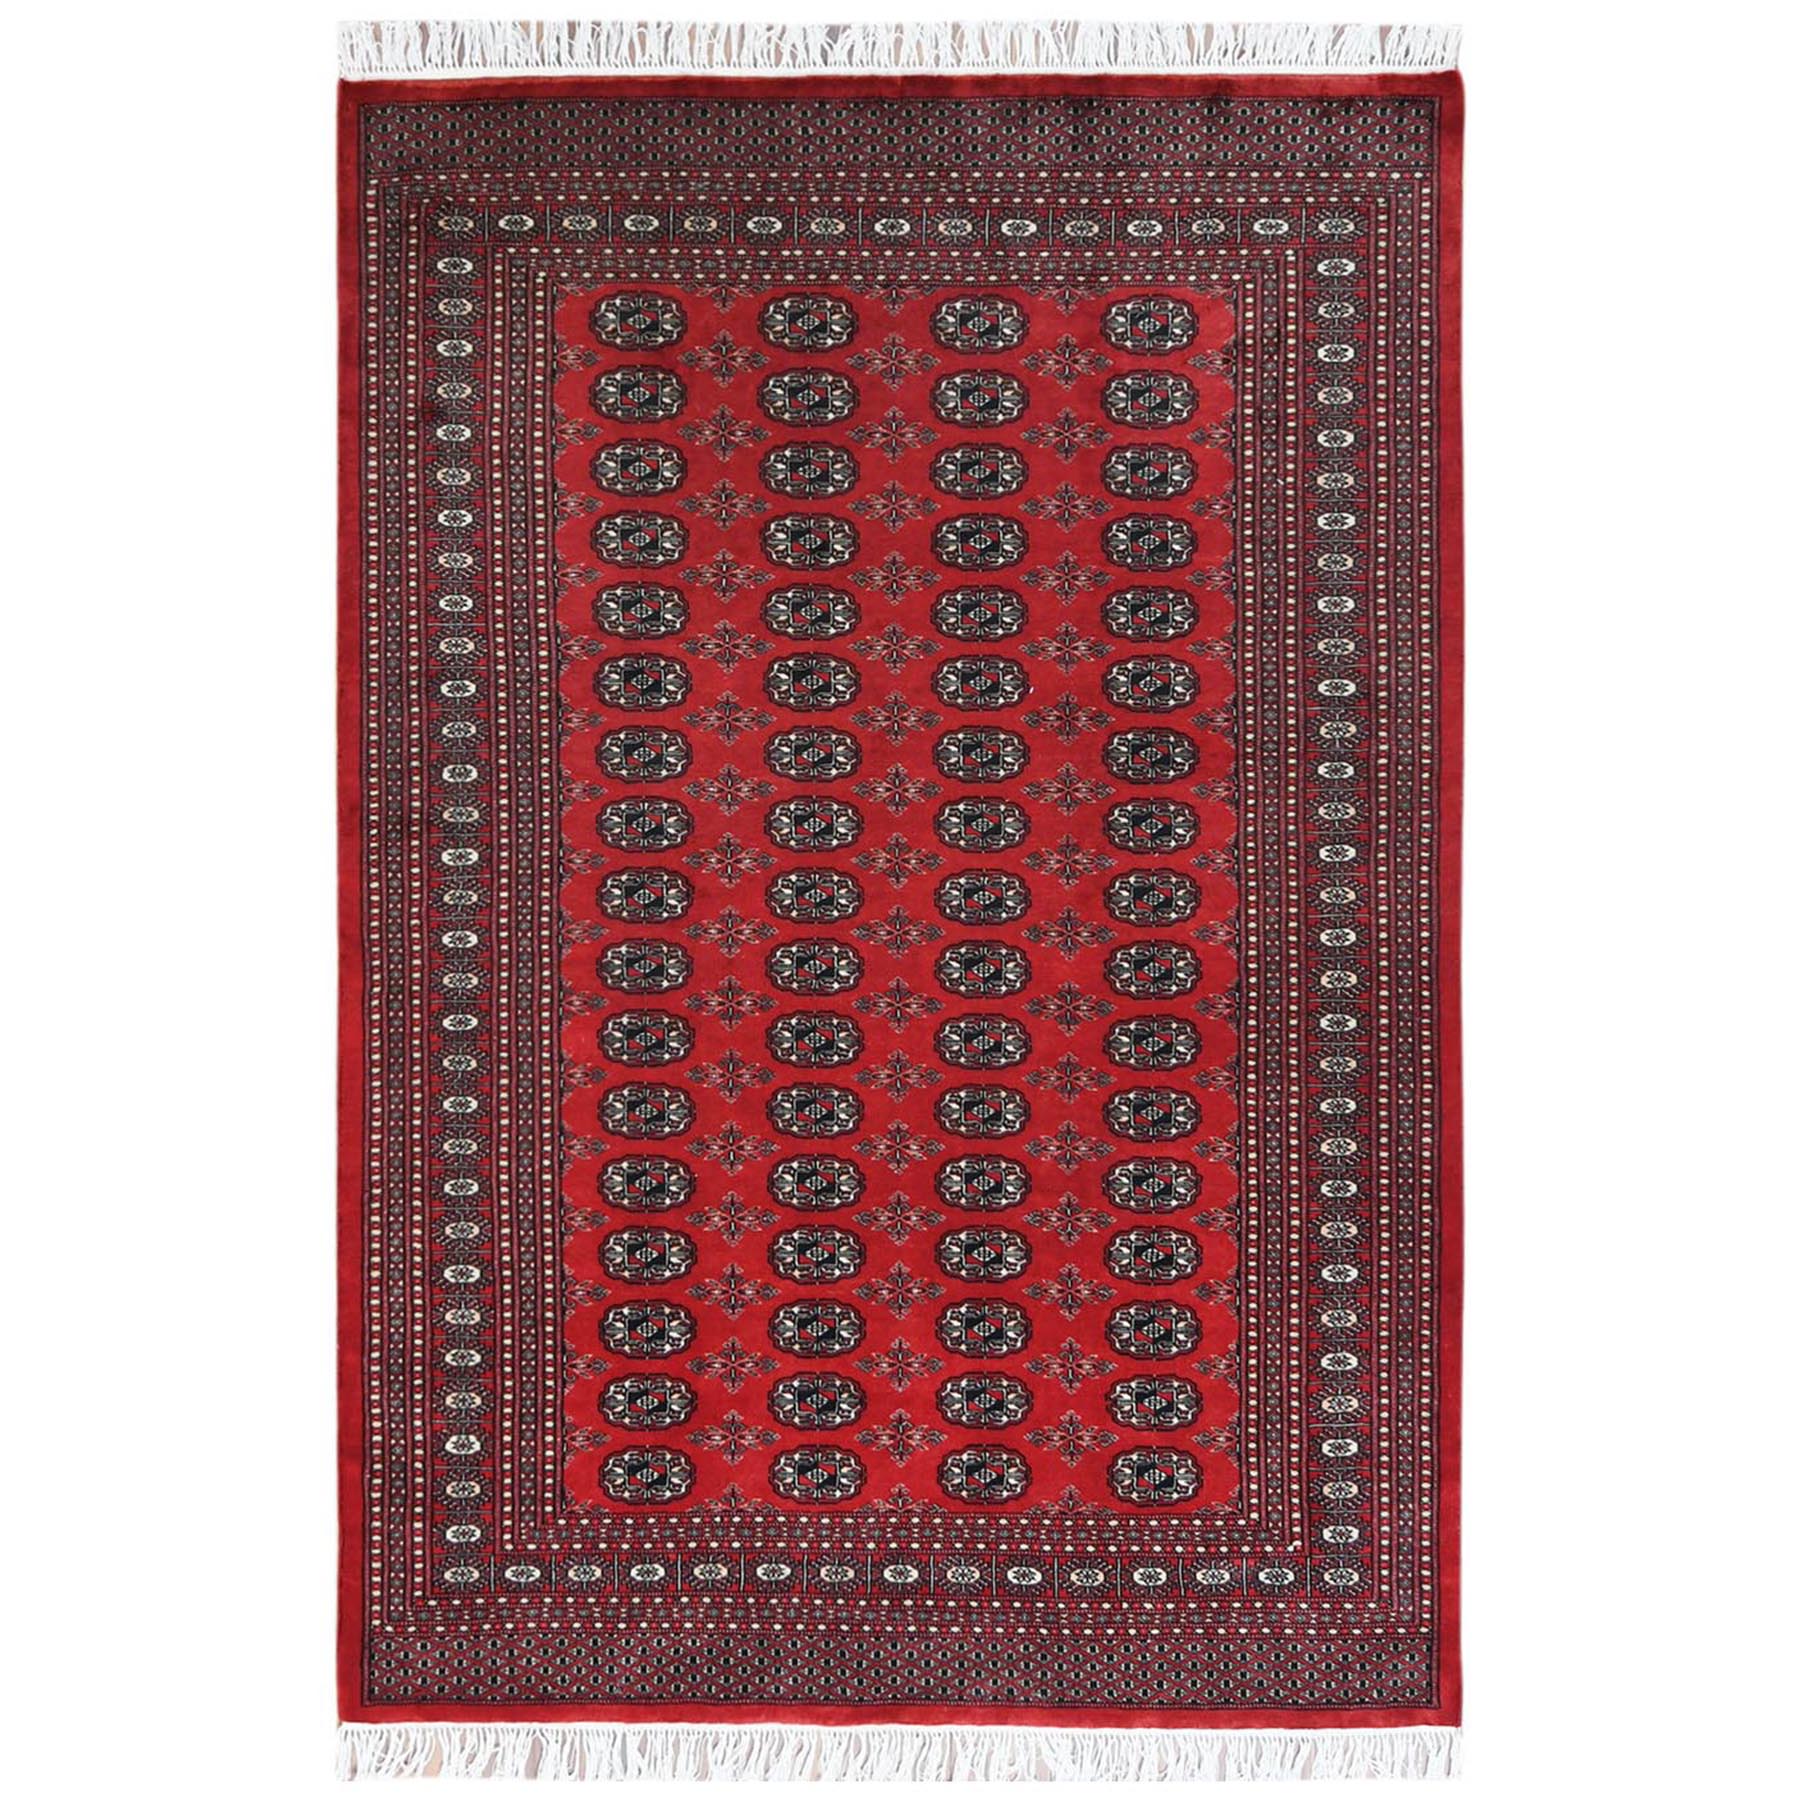 Nomadic And Village Collection Hand Knotted Red Rug No: 1122758